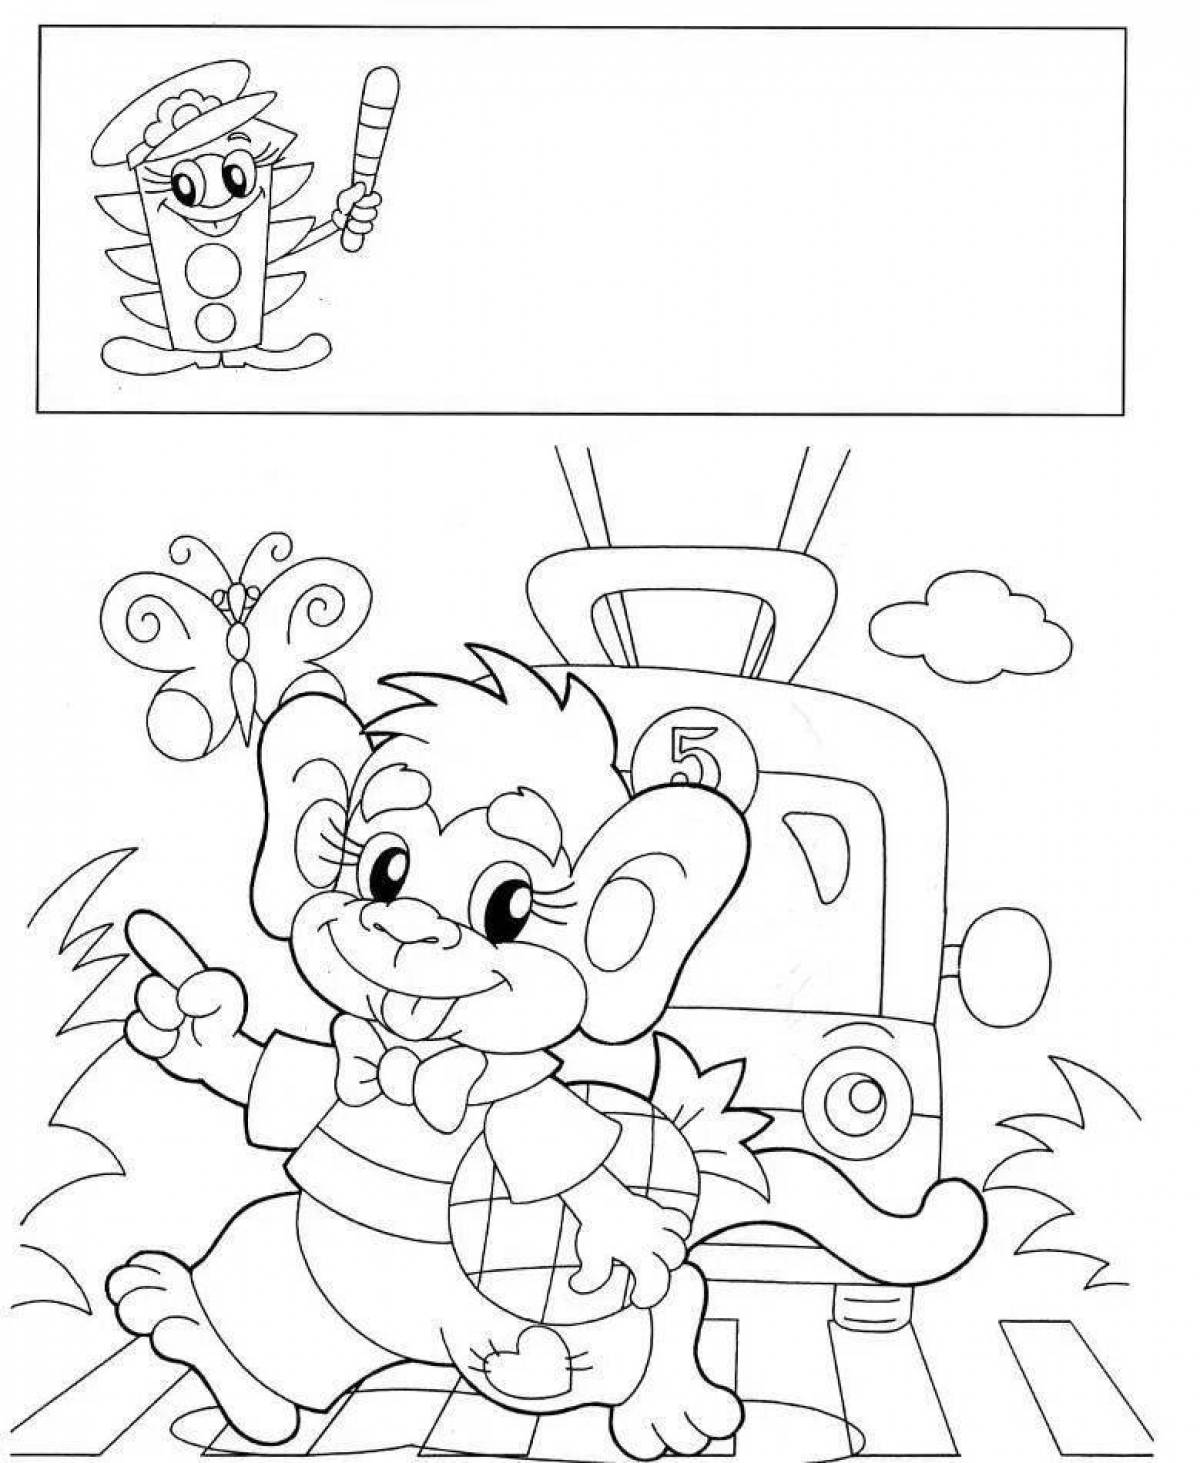 Playful traffic rules coloring page for 5-6 year olds